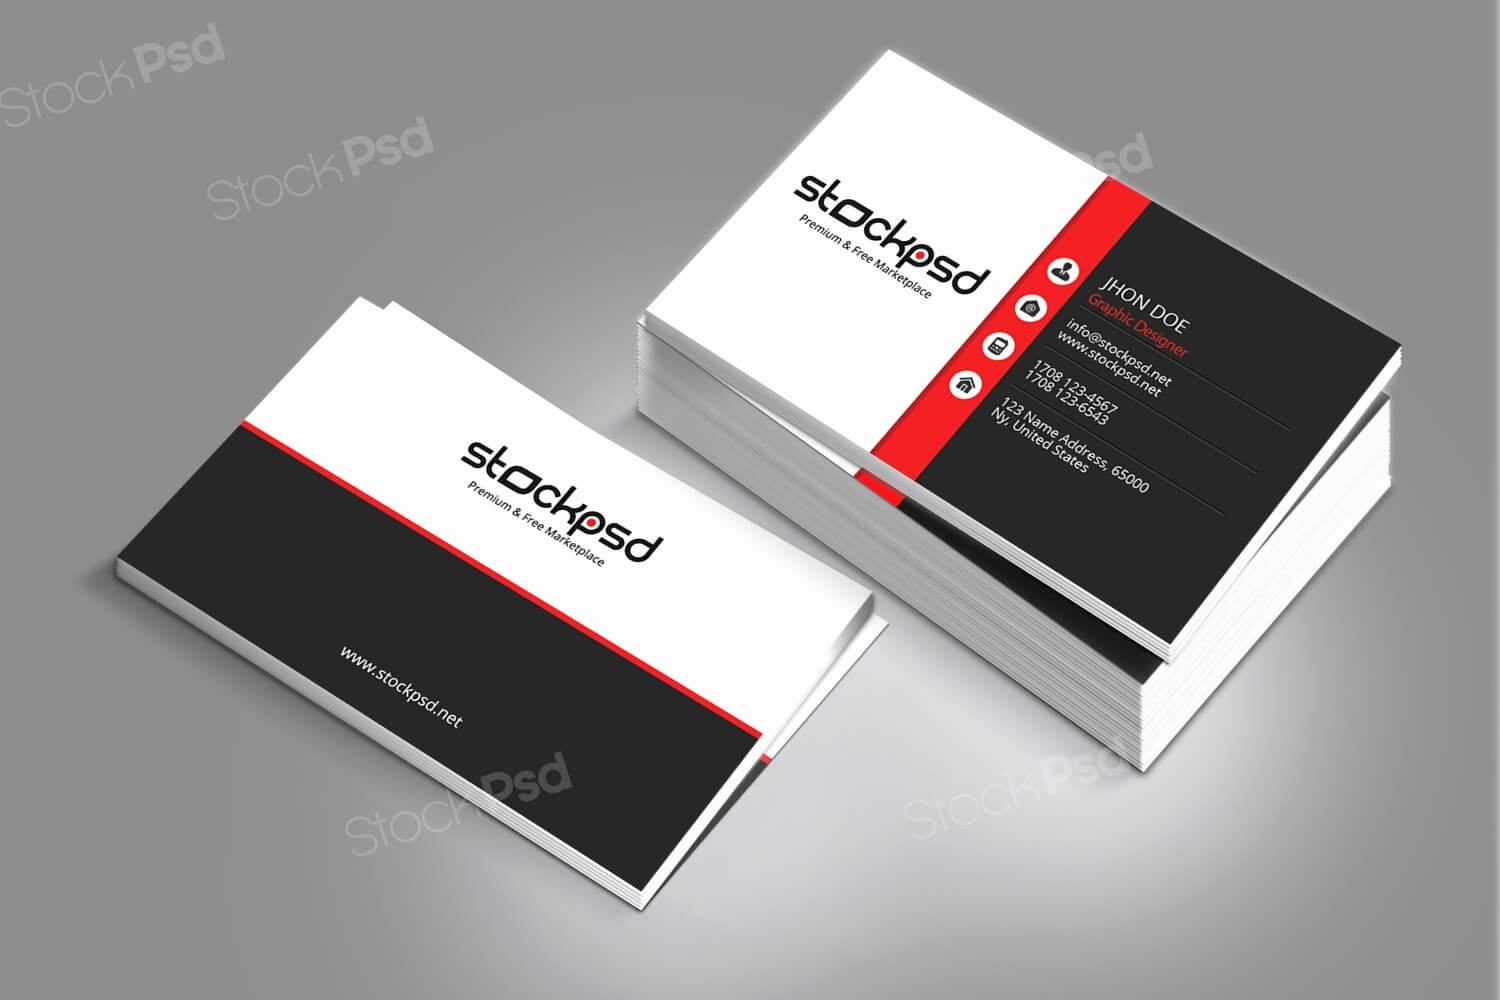 005 Template Ideas Staples Business Cards Templates Card Throughout Staples Business Card Template Word